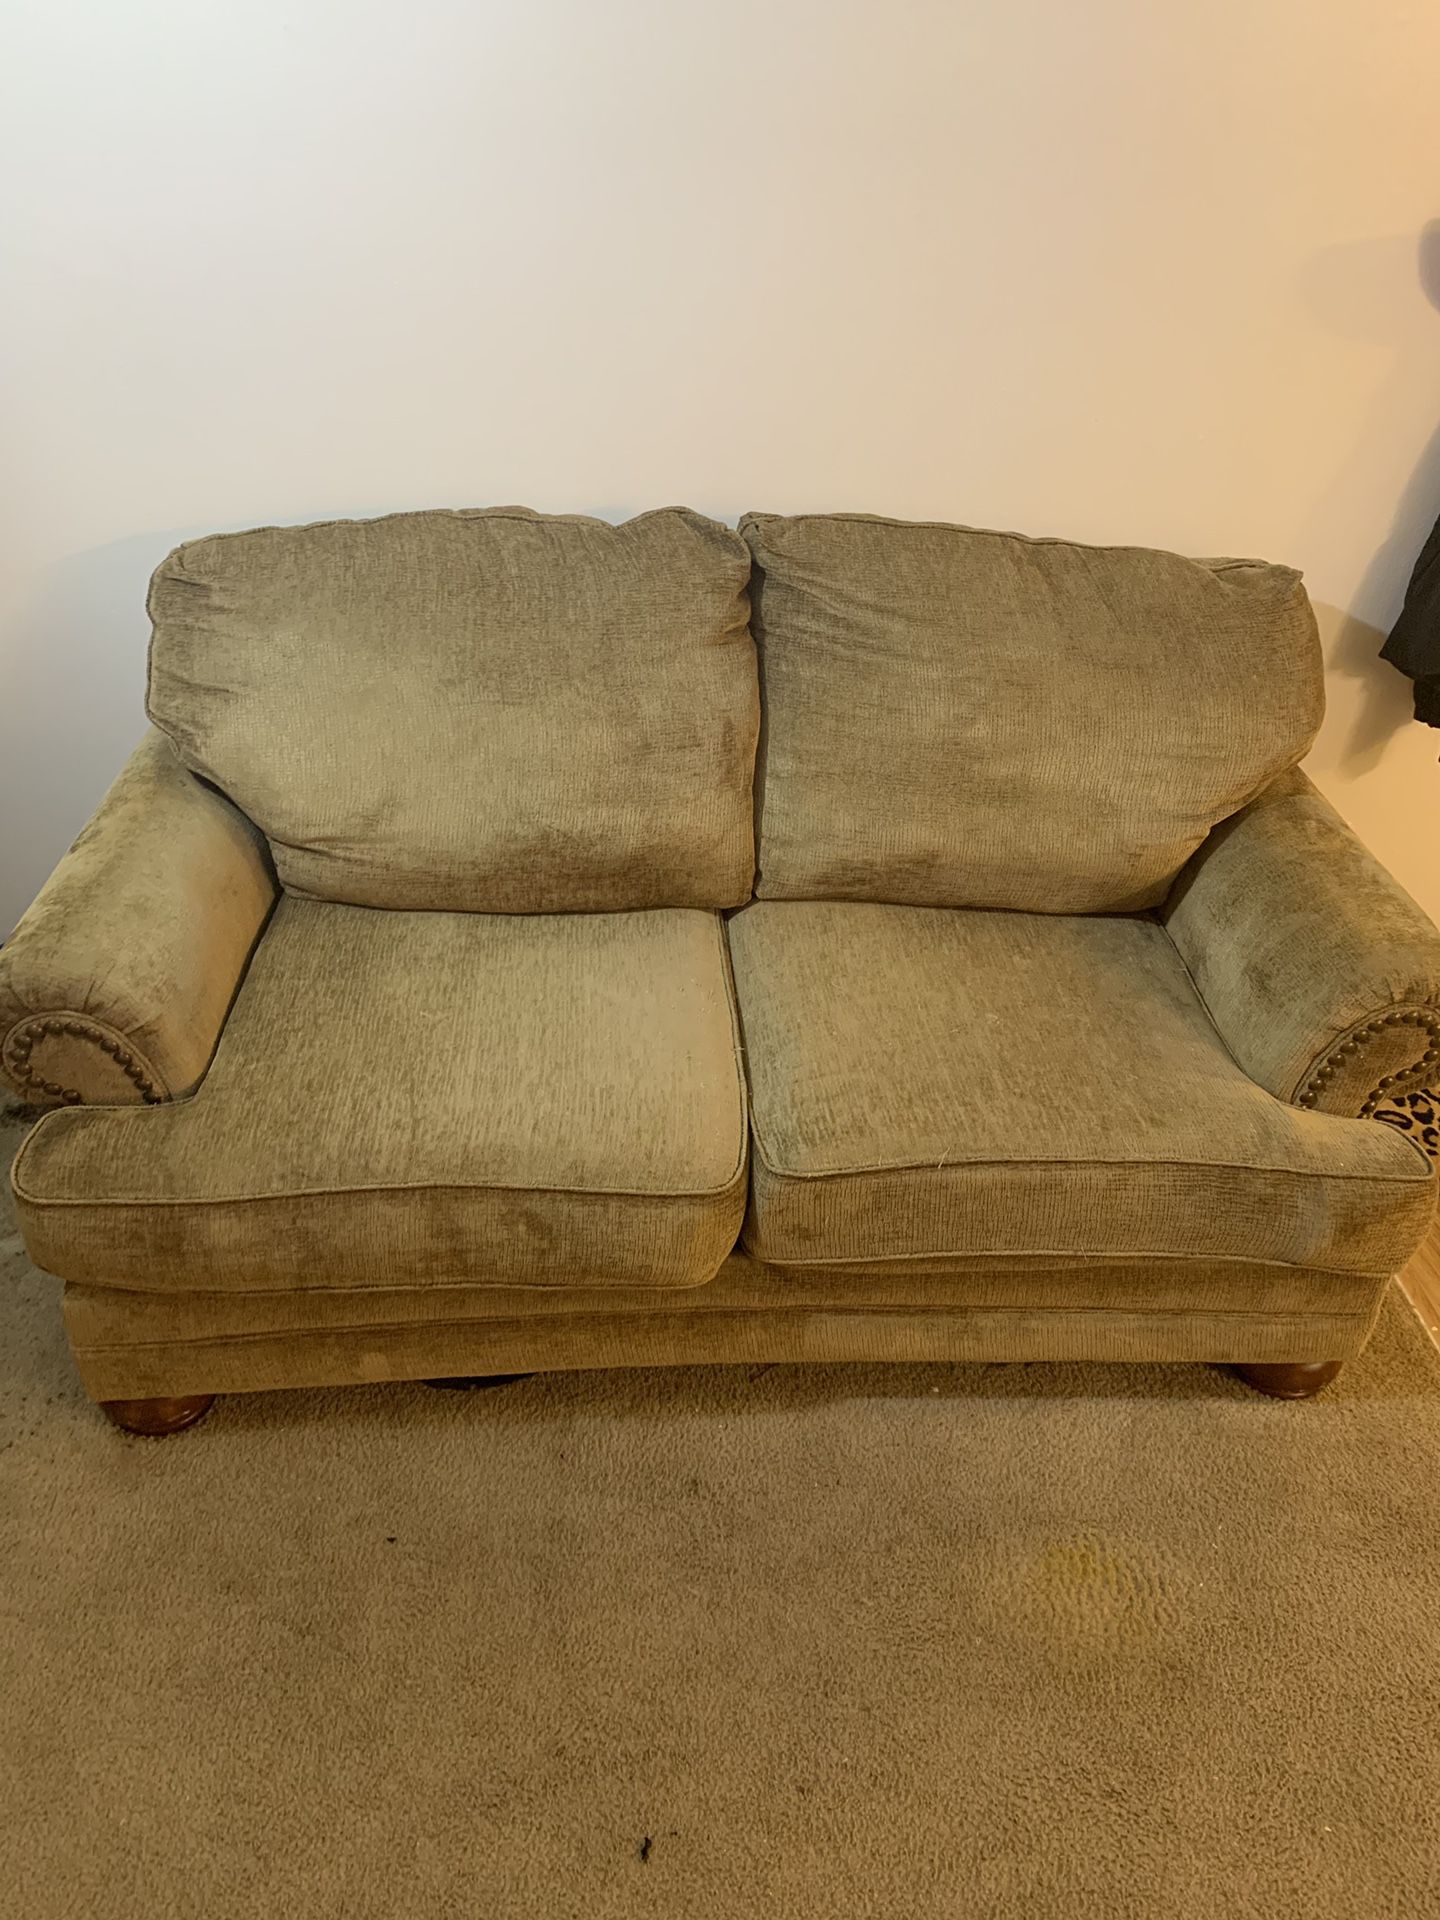 Two Seated Comfortable Couch